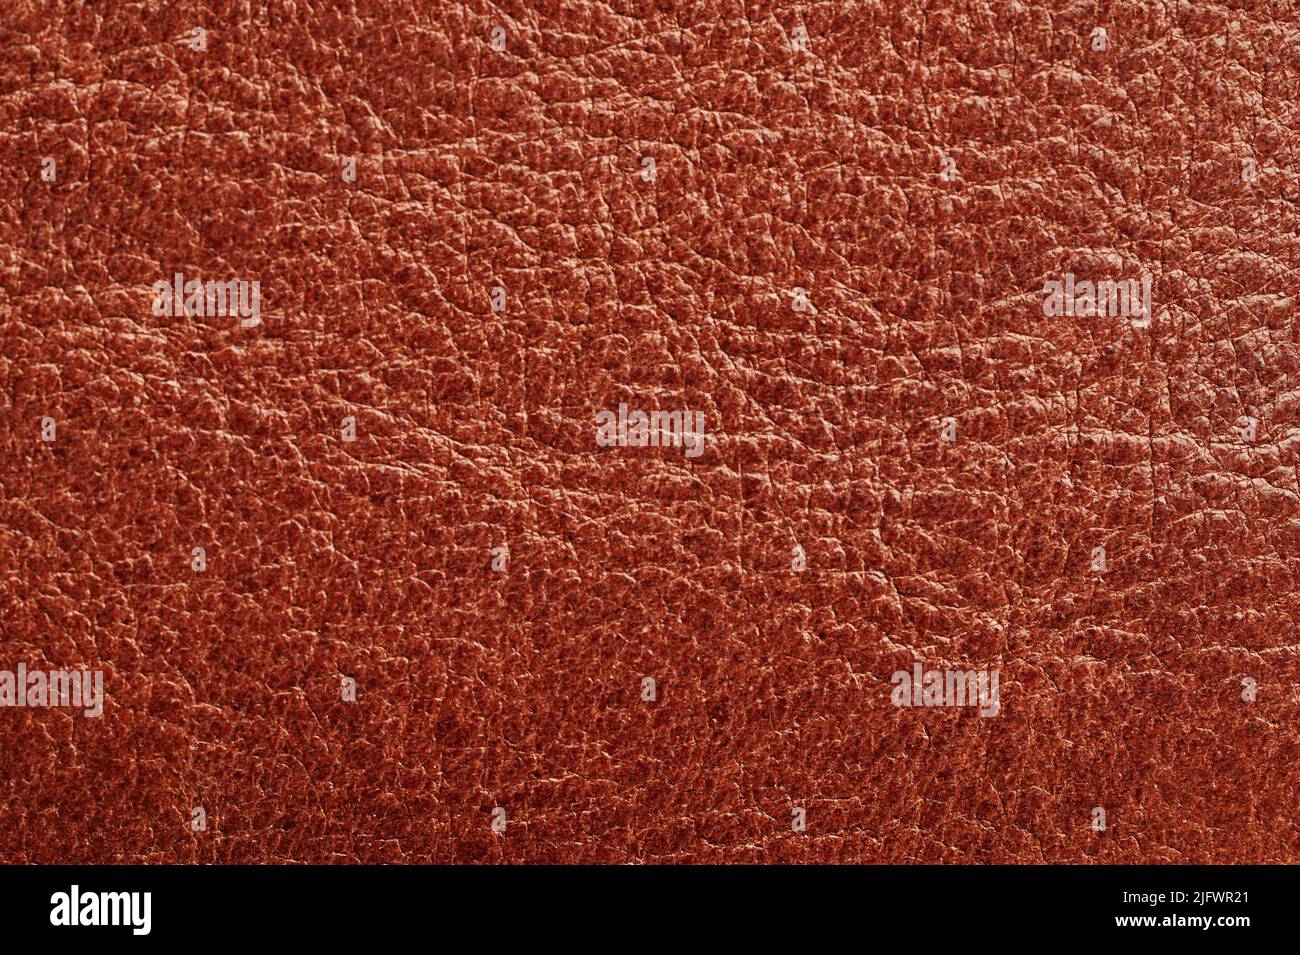 Rough brown color leather material macro close up view Stock Photo